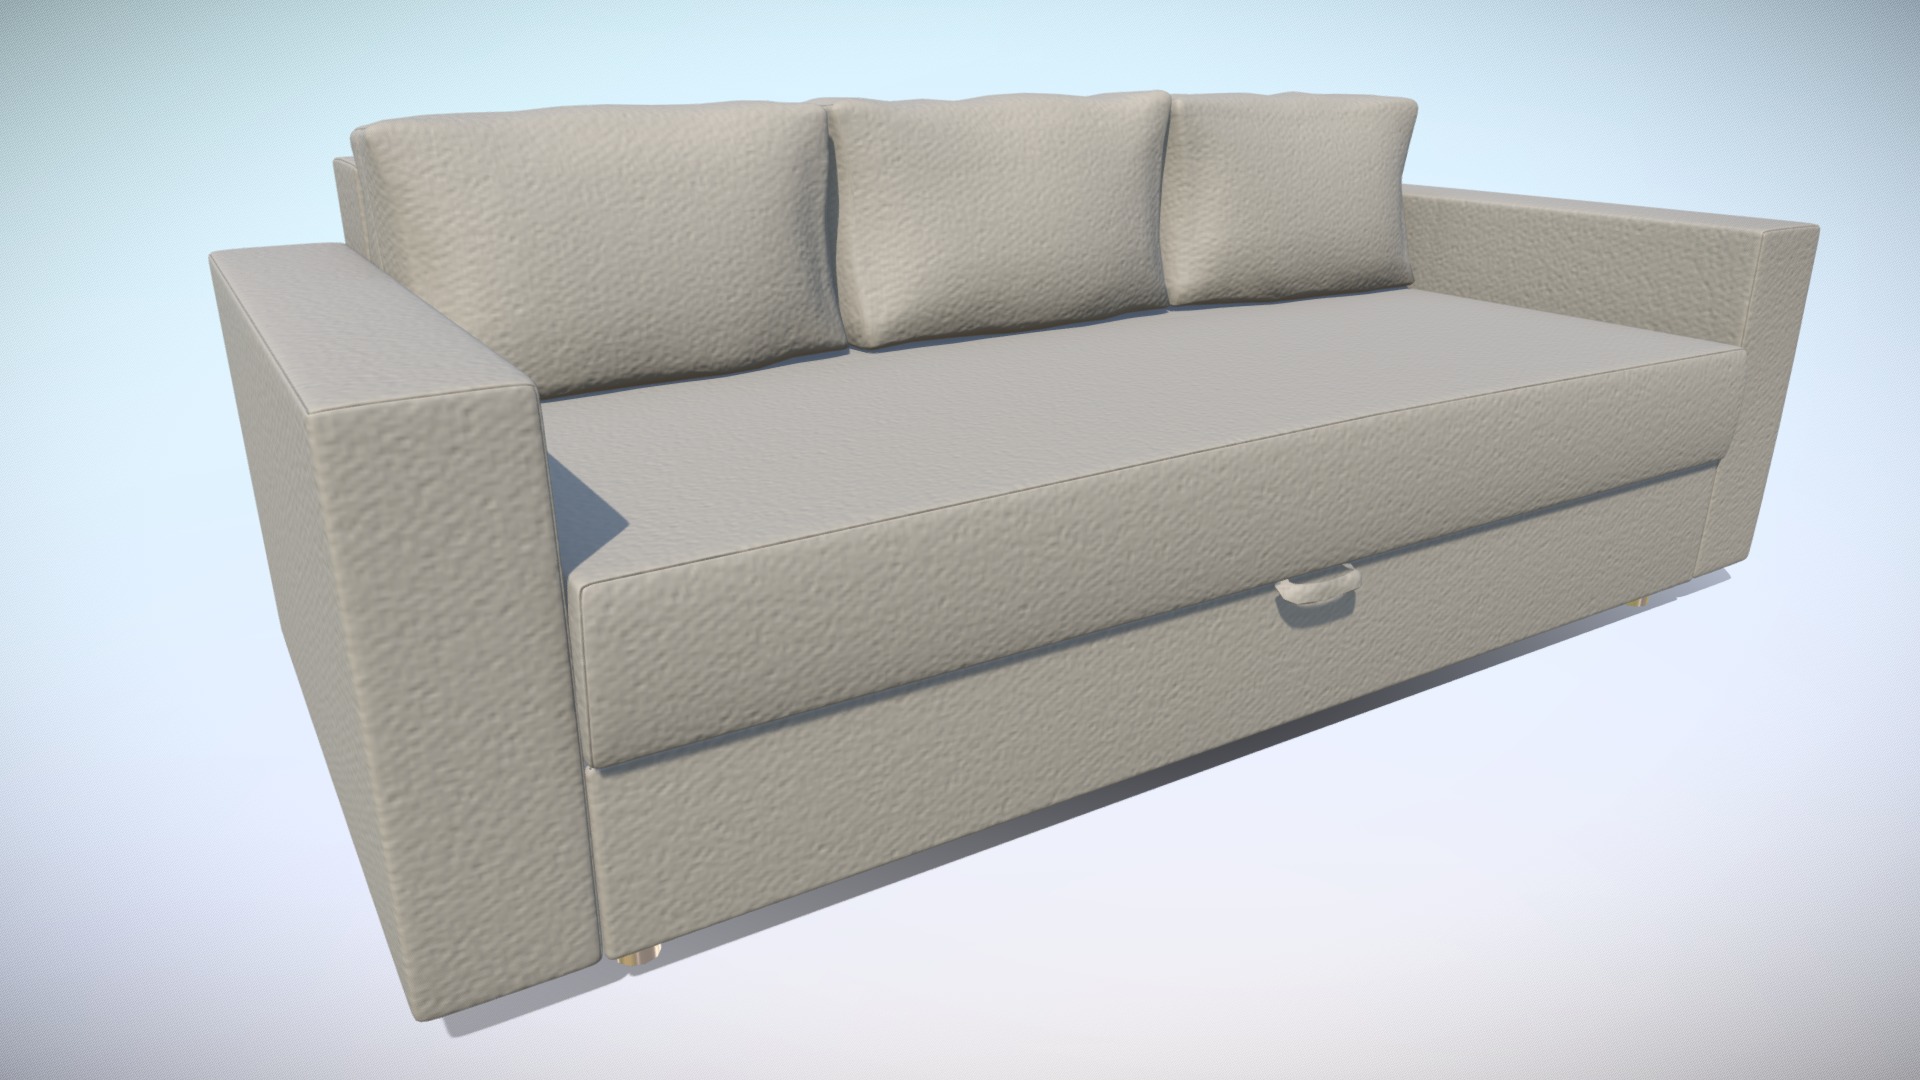 3D model Sofa-Bed IKEA Friheten Low-poly - This is a 3D model of the Sofa-Bed IKEA Friheten Low-poly. The 3D model is about a white couch with a white cushion.